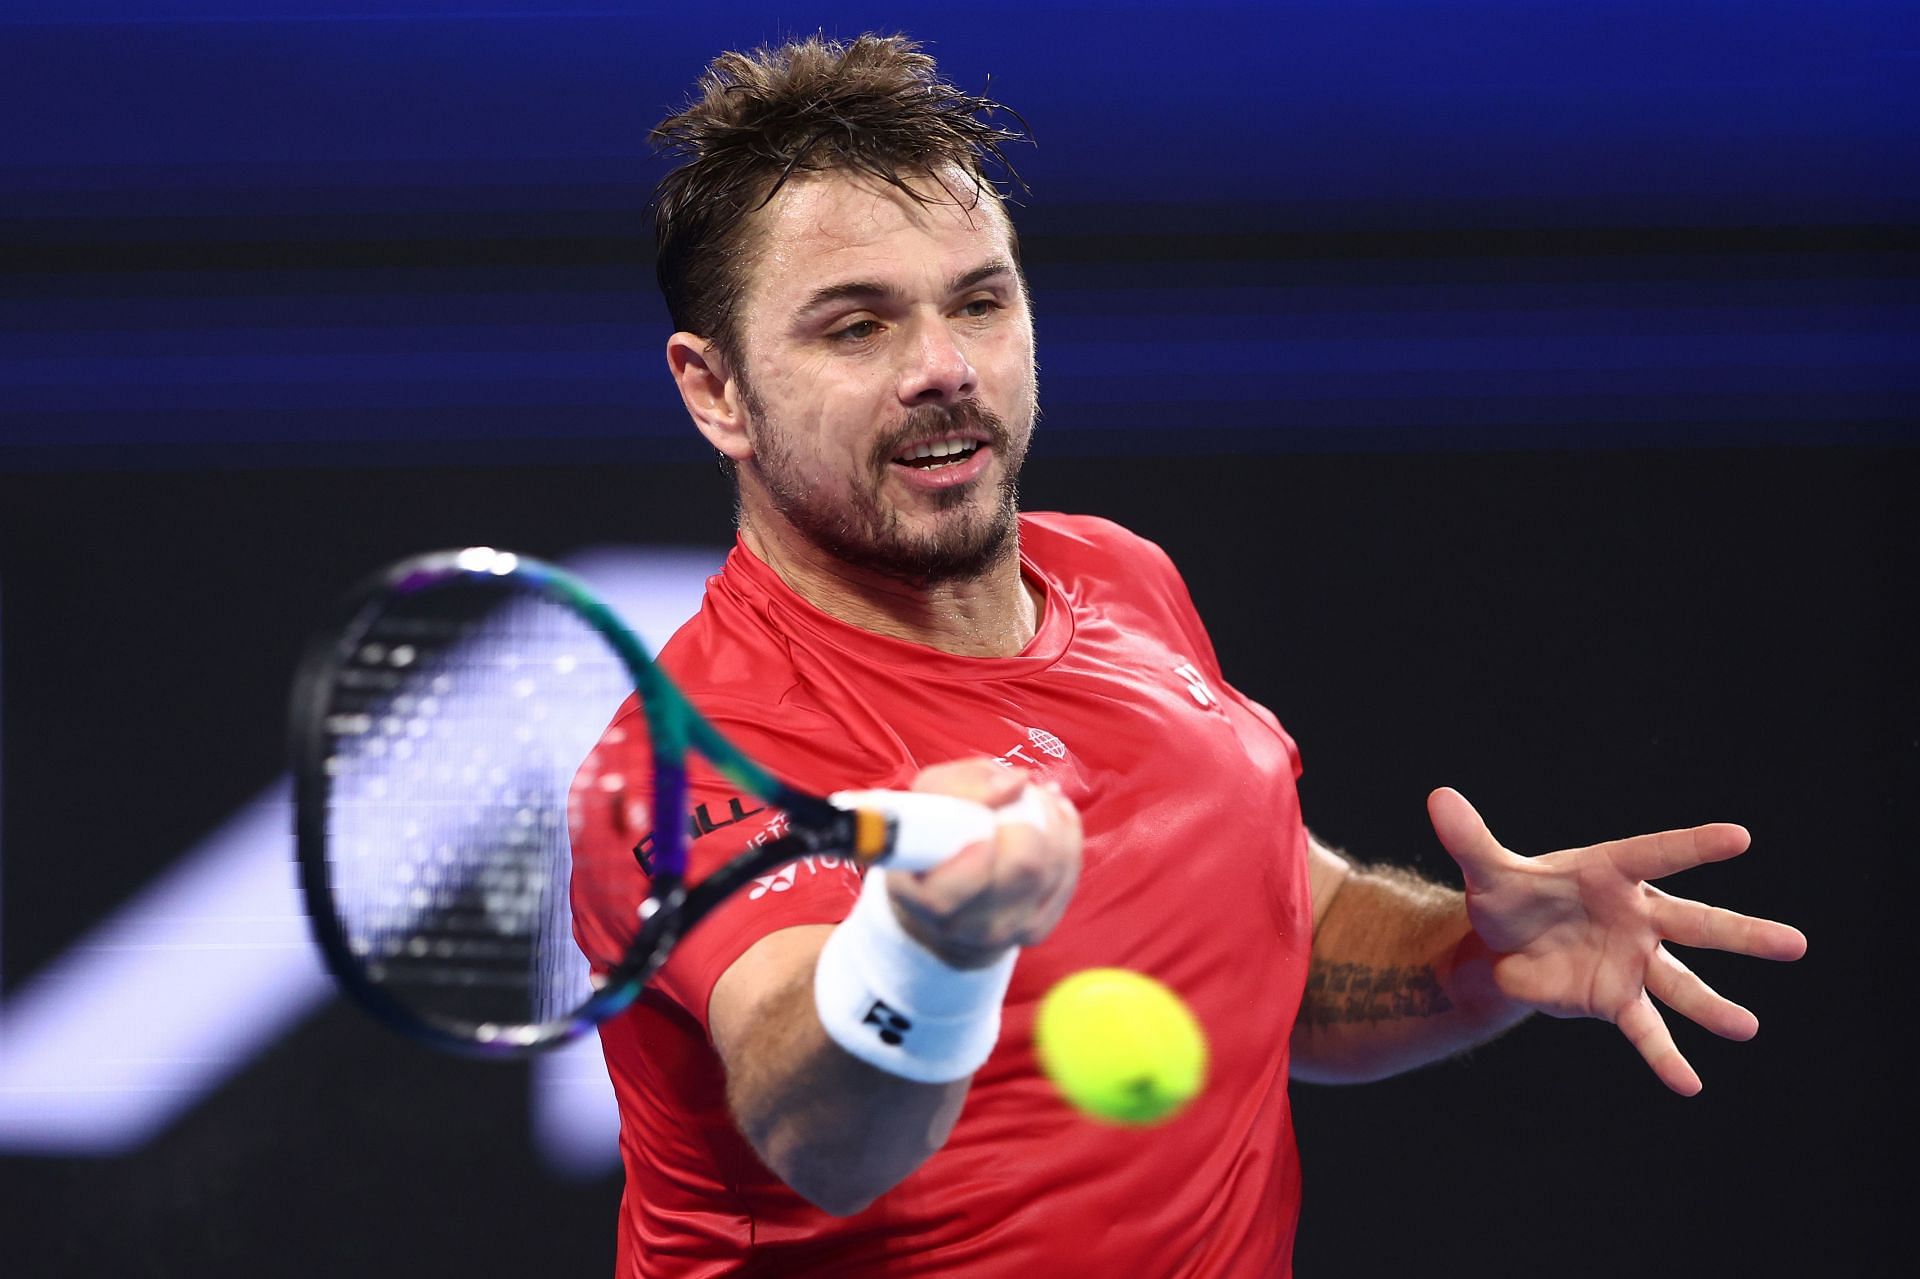 Stan Wawrinka is currently ranked World No. 139 in the world